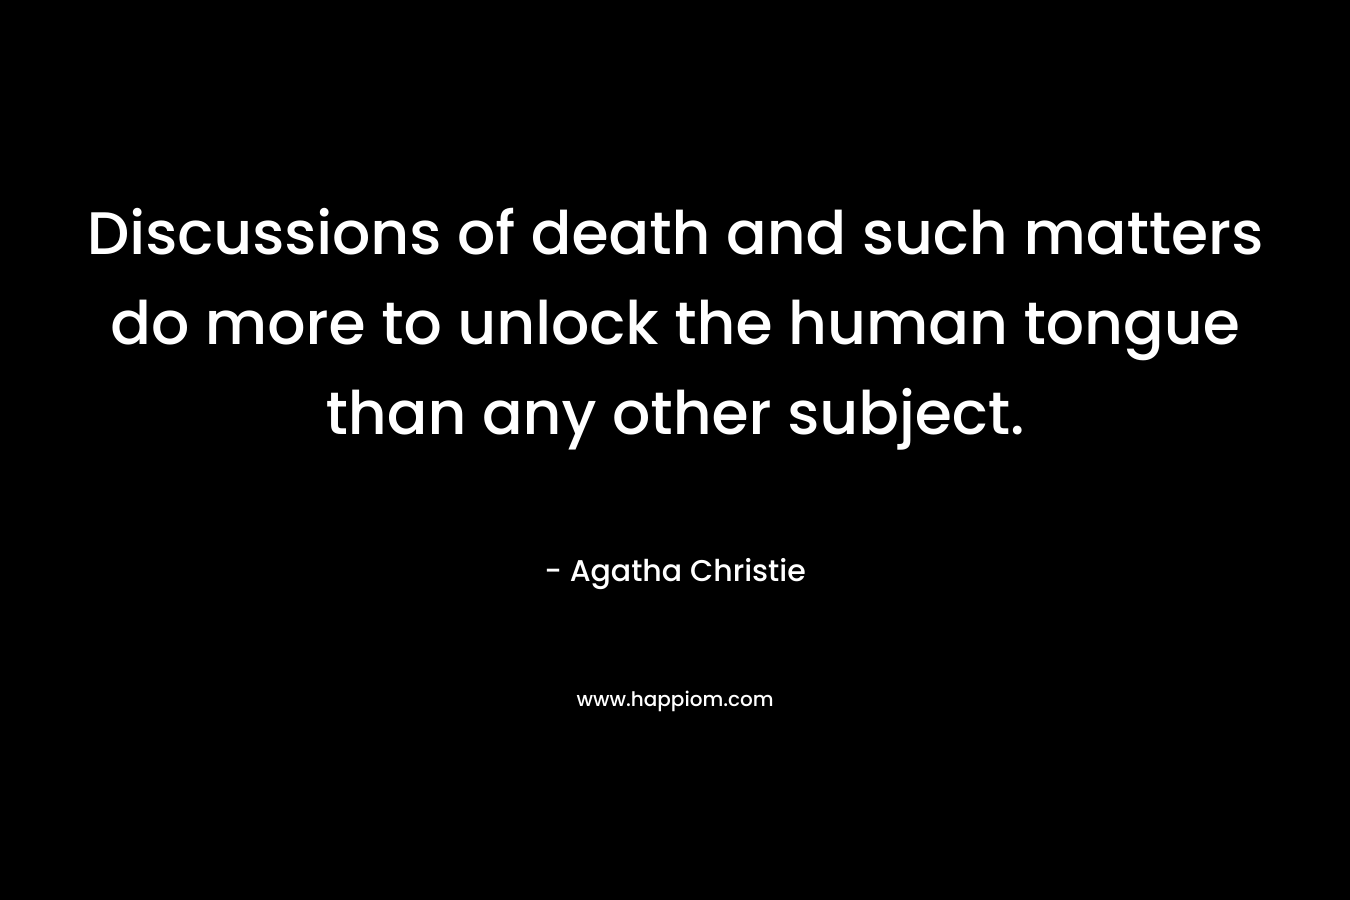 Discussions of death and such matters do more to unlock the human tongue than any other subject. – Agatha Christie